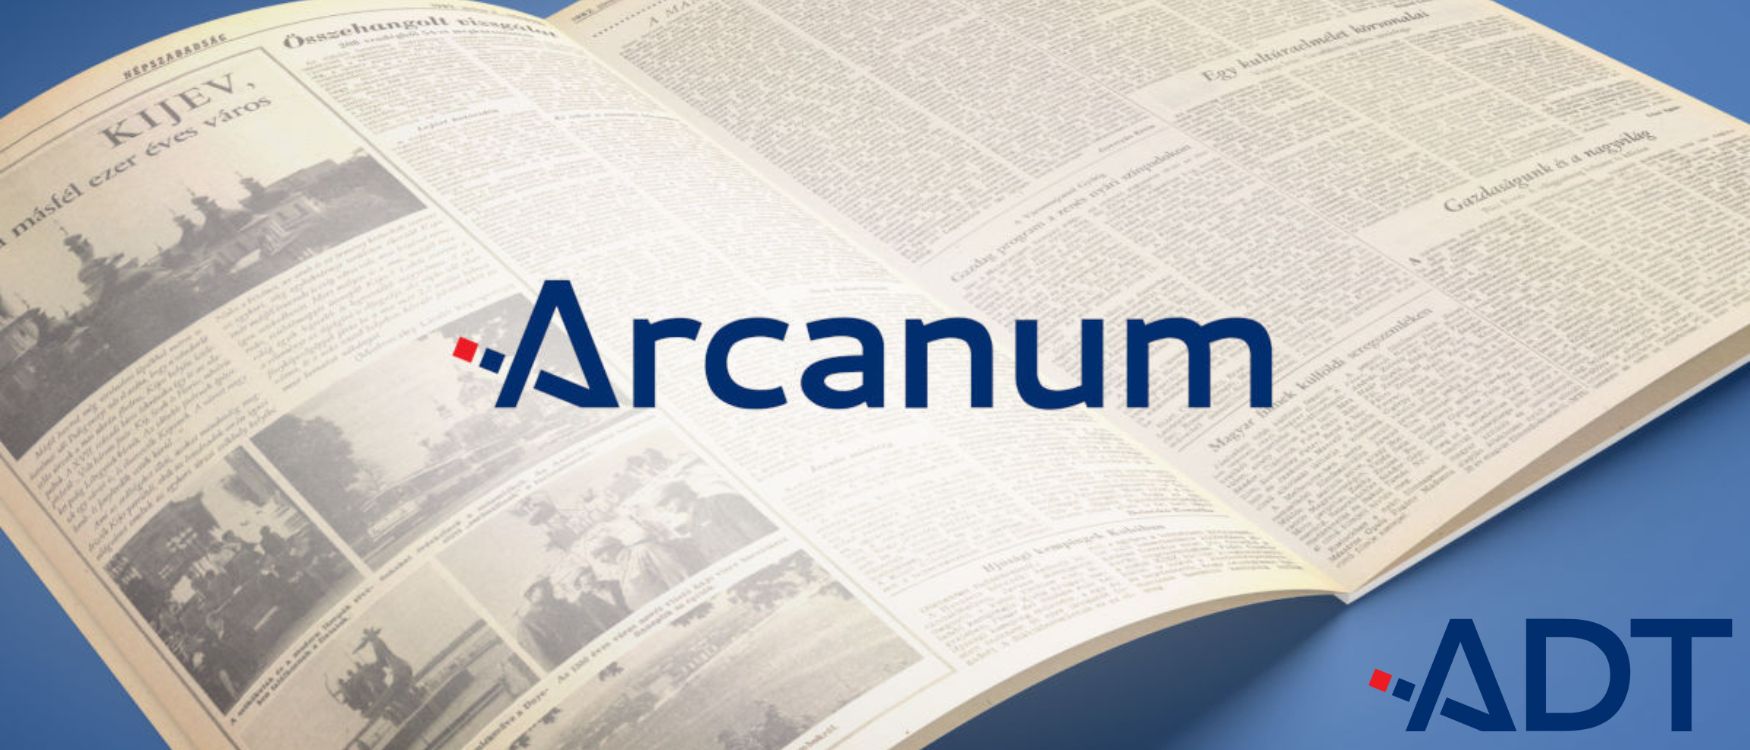 The publisher provides a two-month free access to Arcanum Digitheca from May, 2024